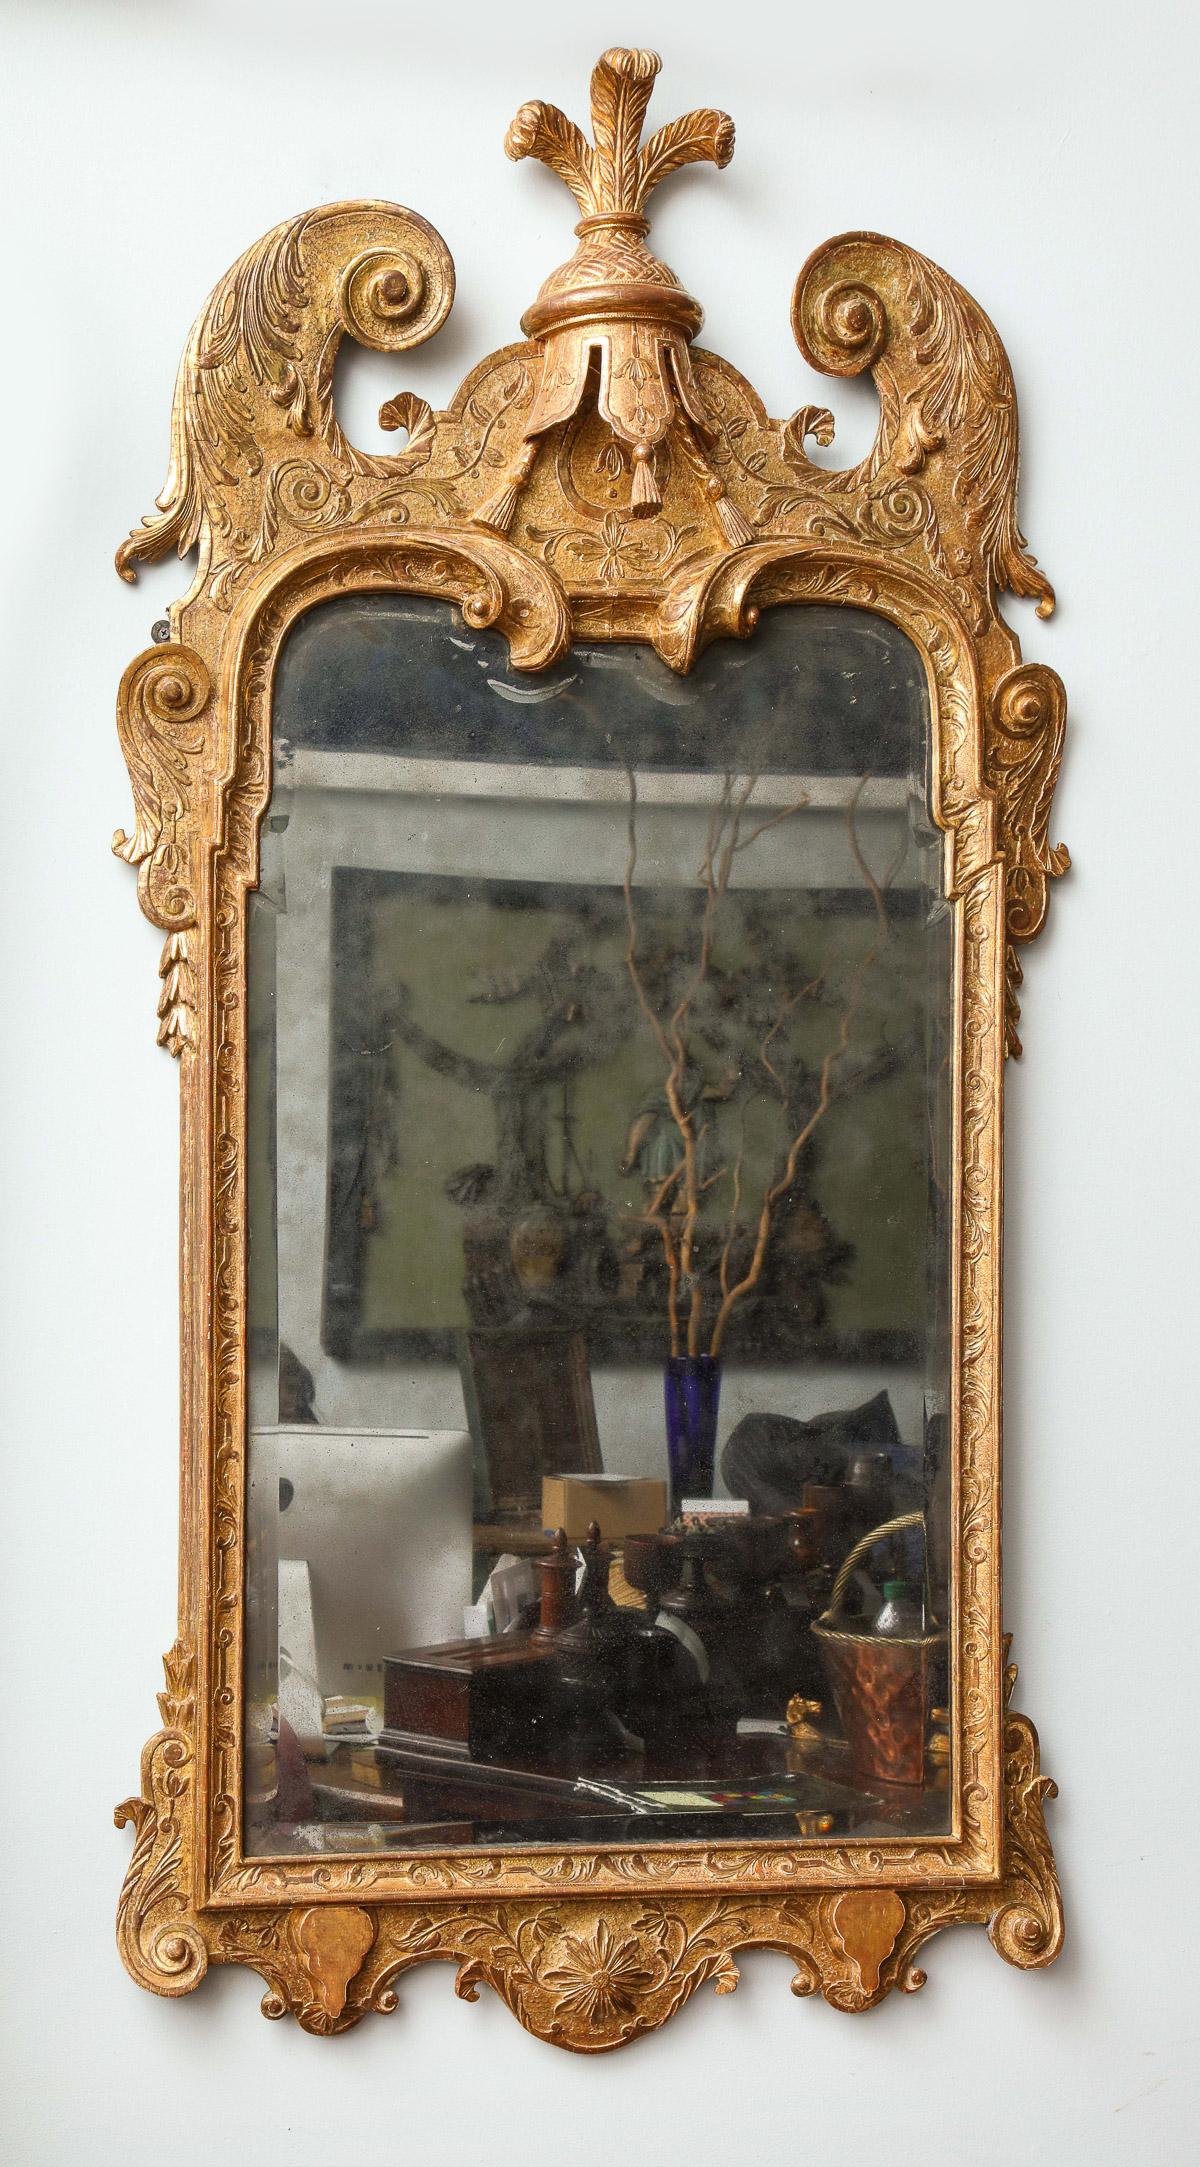 Very fine George I carved and gilt mirror, circa 1720, in the manner of John Belchier having an ostrich feather plume over tasseled central lambrequin, deep projecting scroll carved flourishes, the original beveled mercury glass plate having